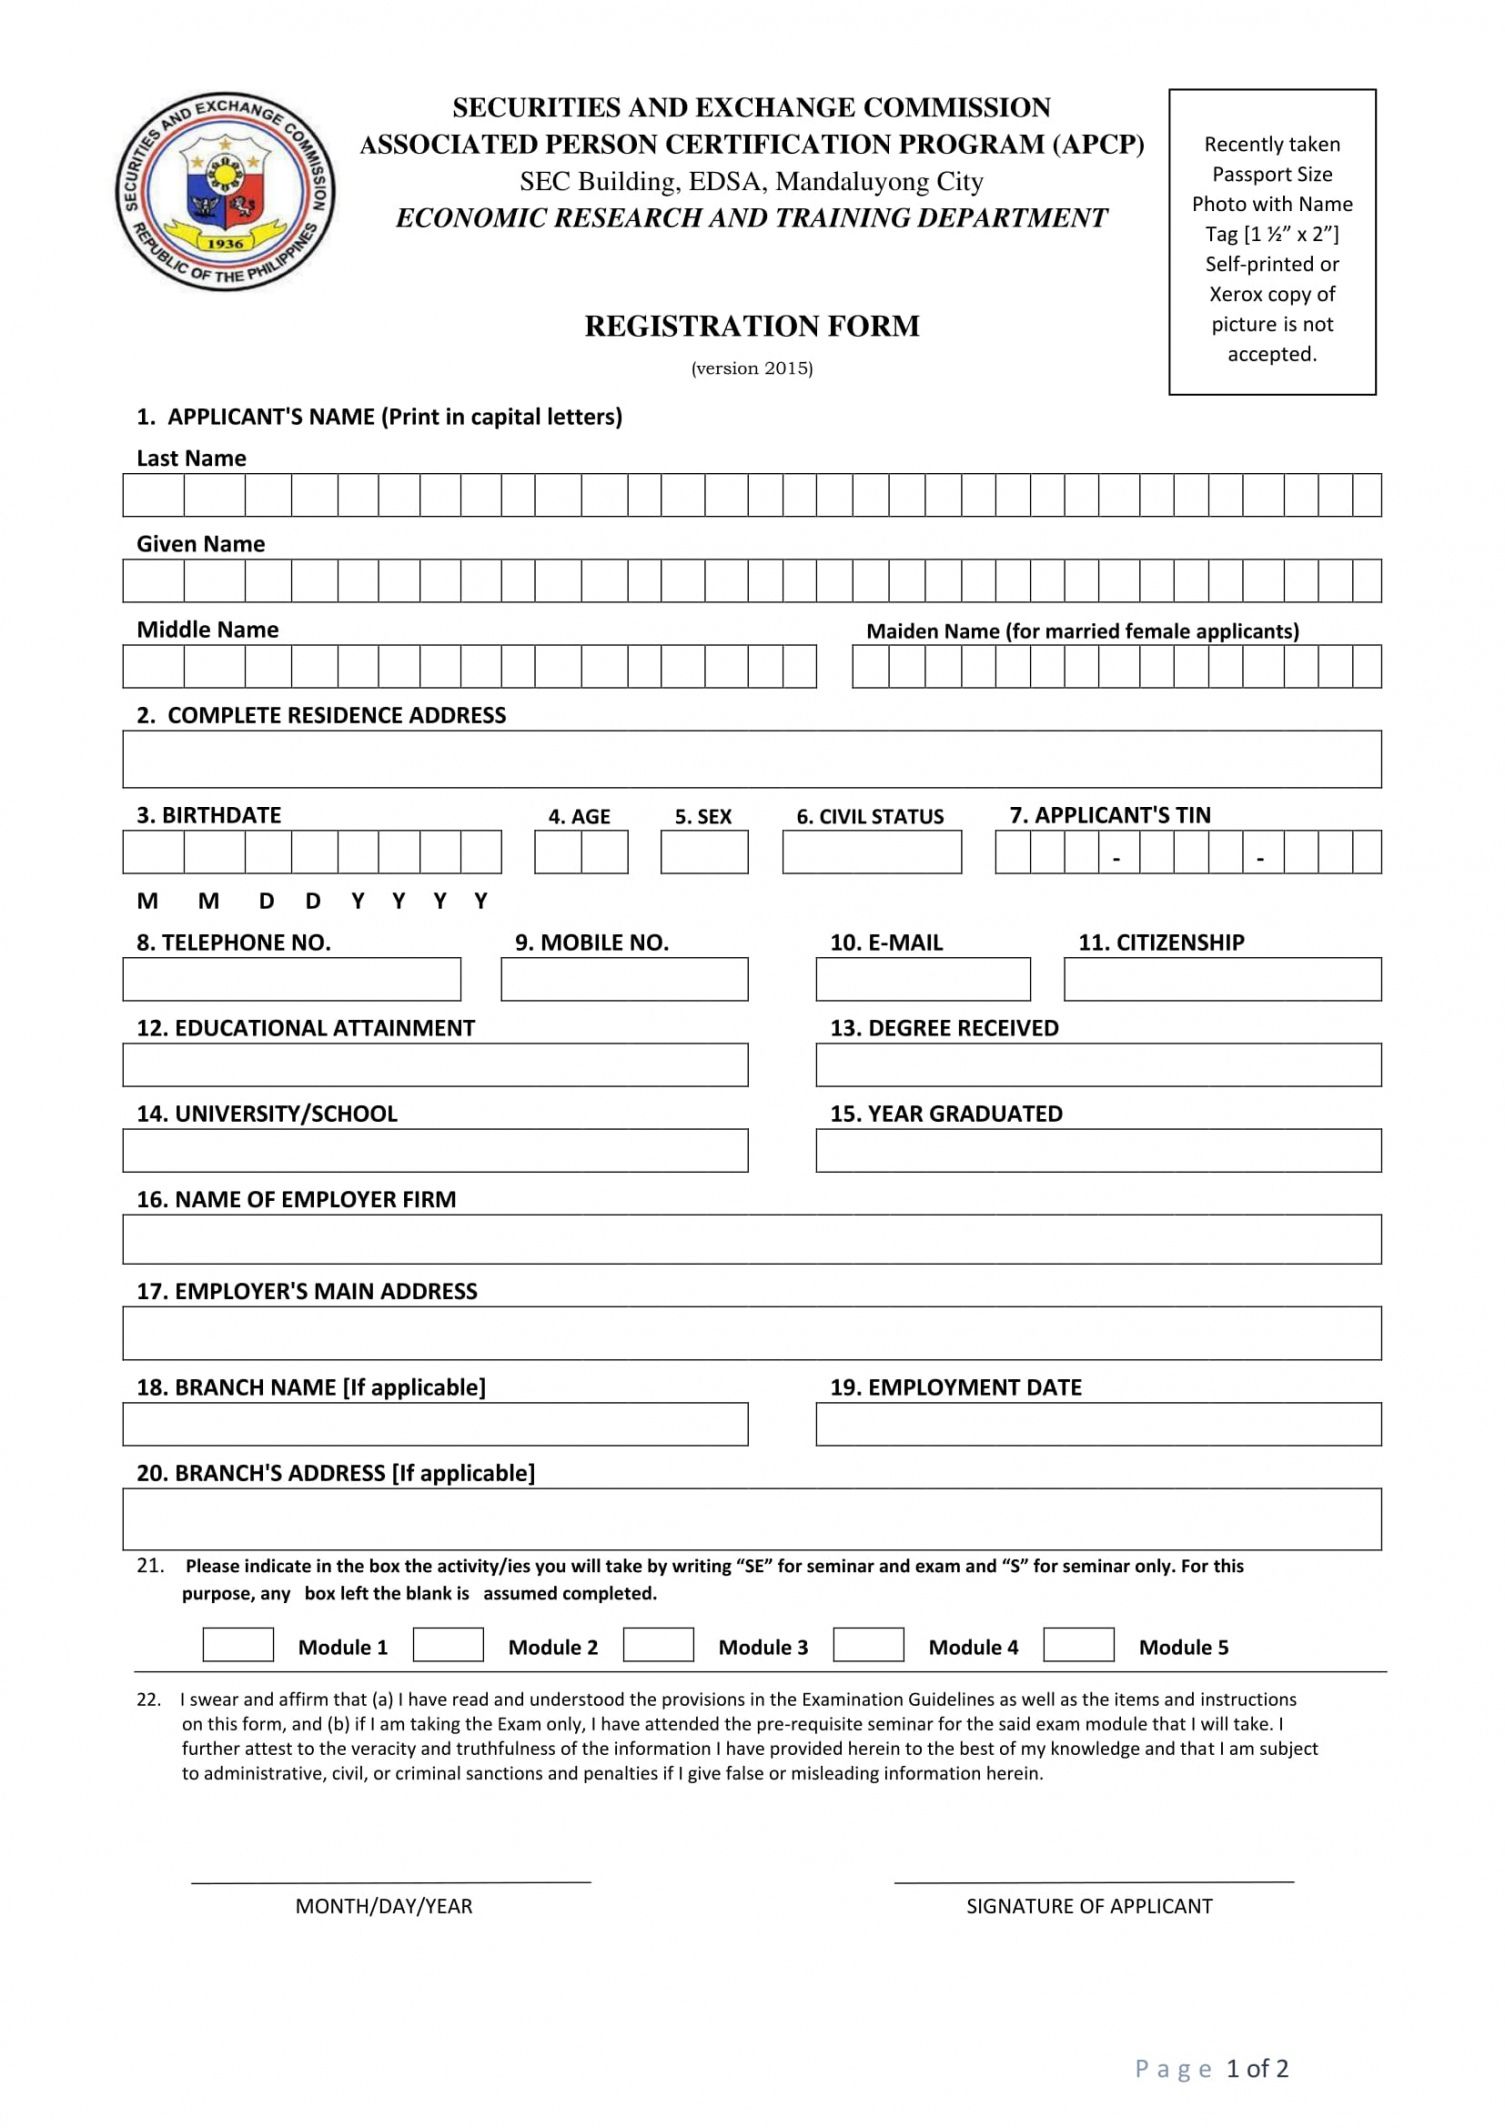 Comelec Registration Form Example / Then add inputs (with a matching